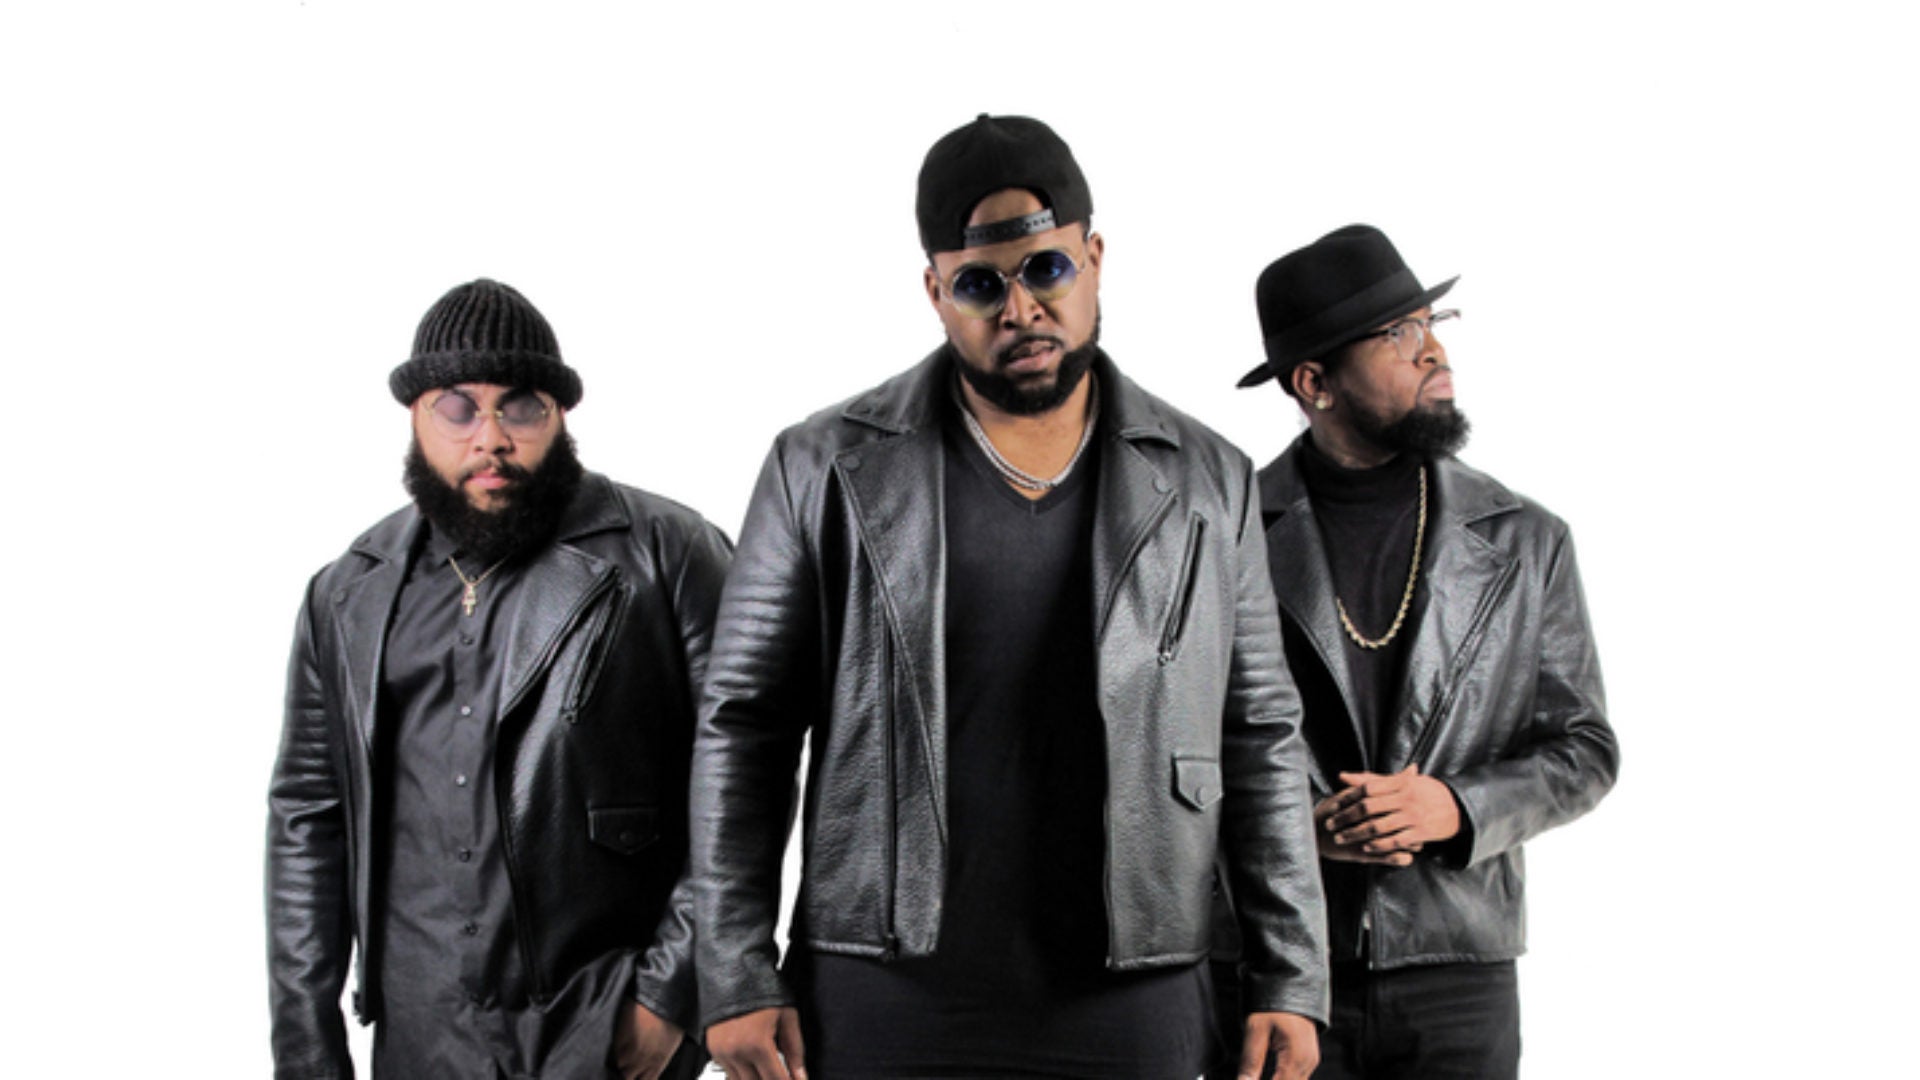 The Hamiltones Fight For True Love In The Video For Their New Single 'Pieces'